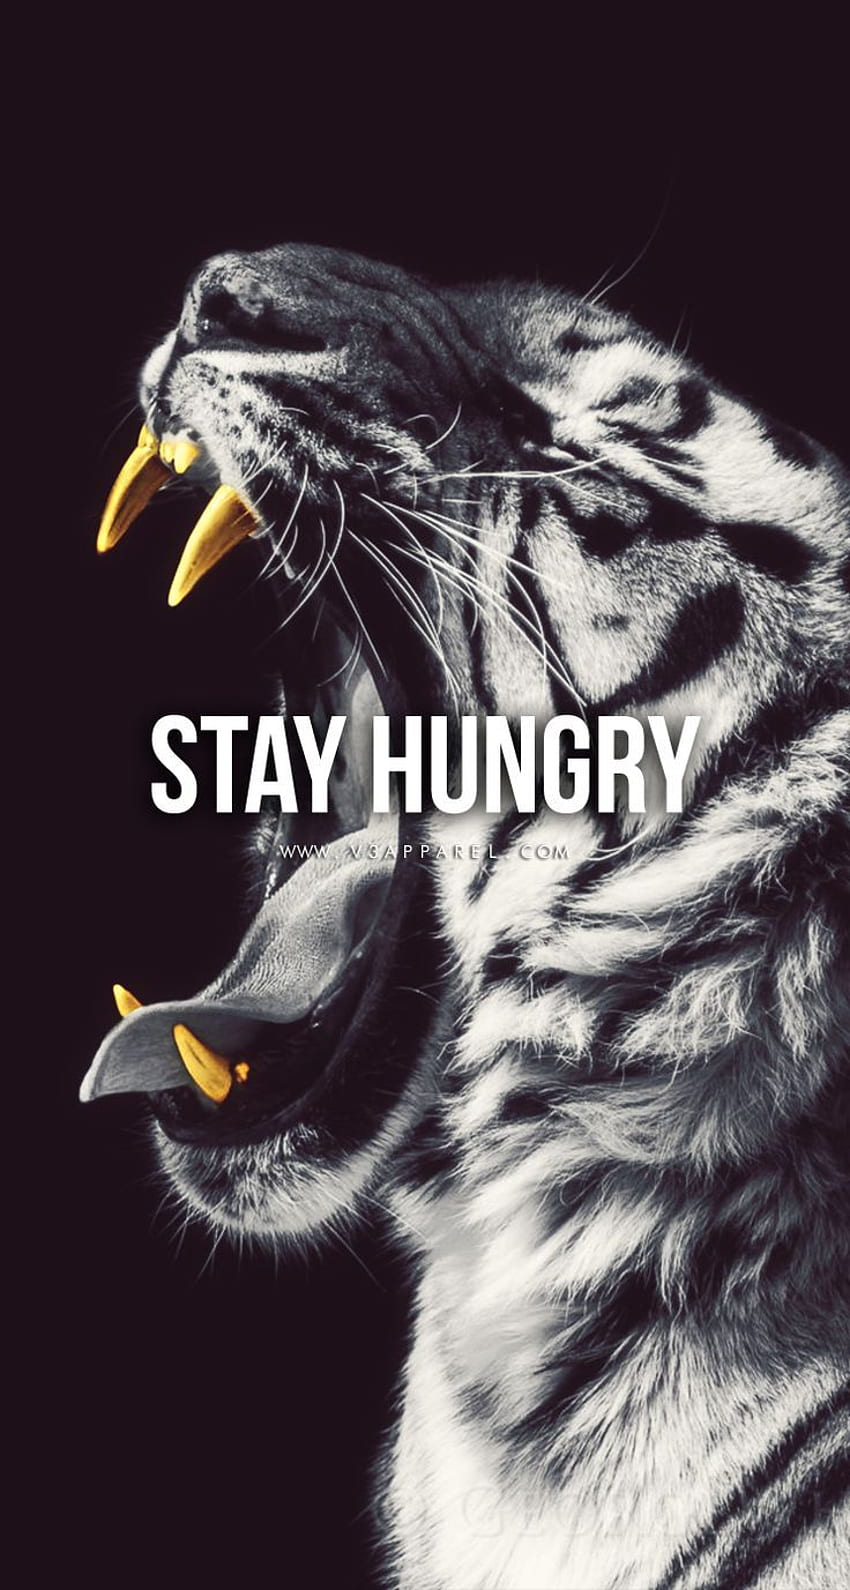 iPhone XS : Stay Hungry. Head over to HD phone wallpaper